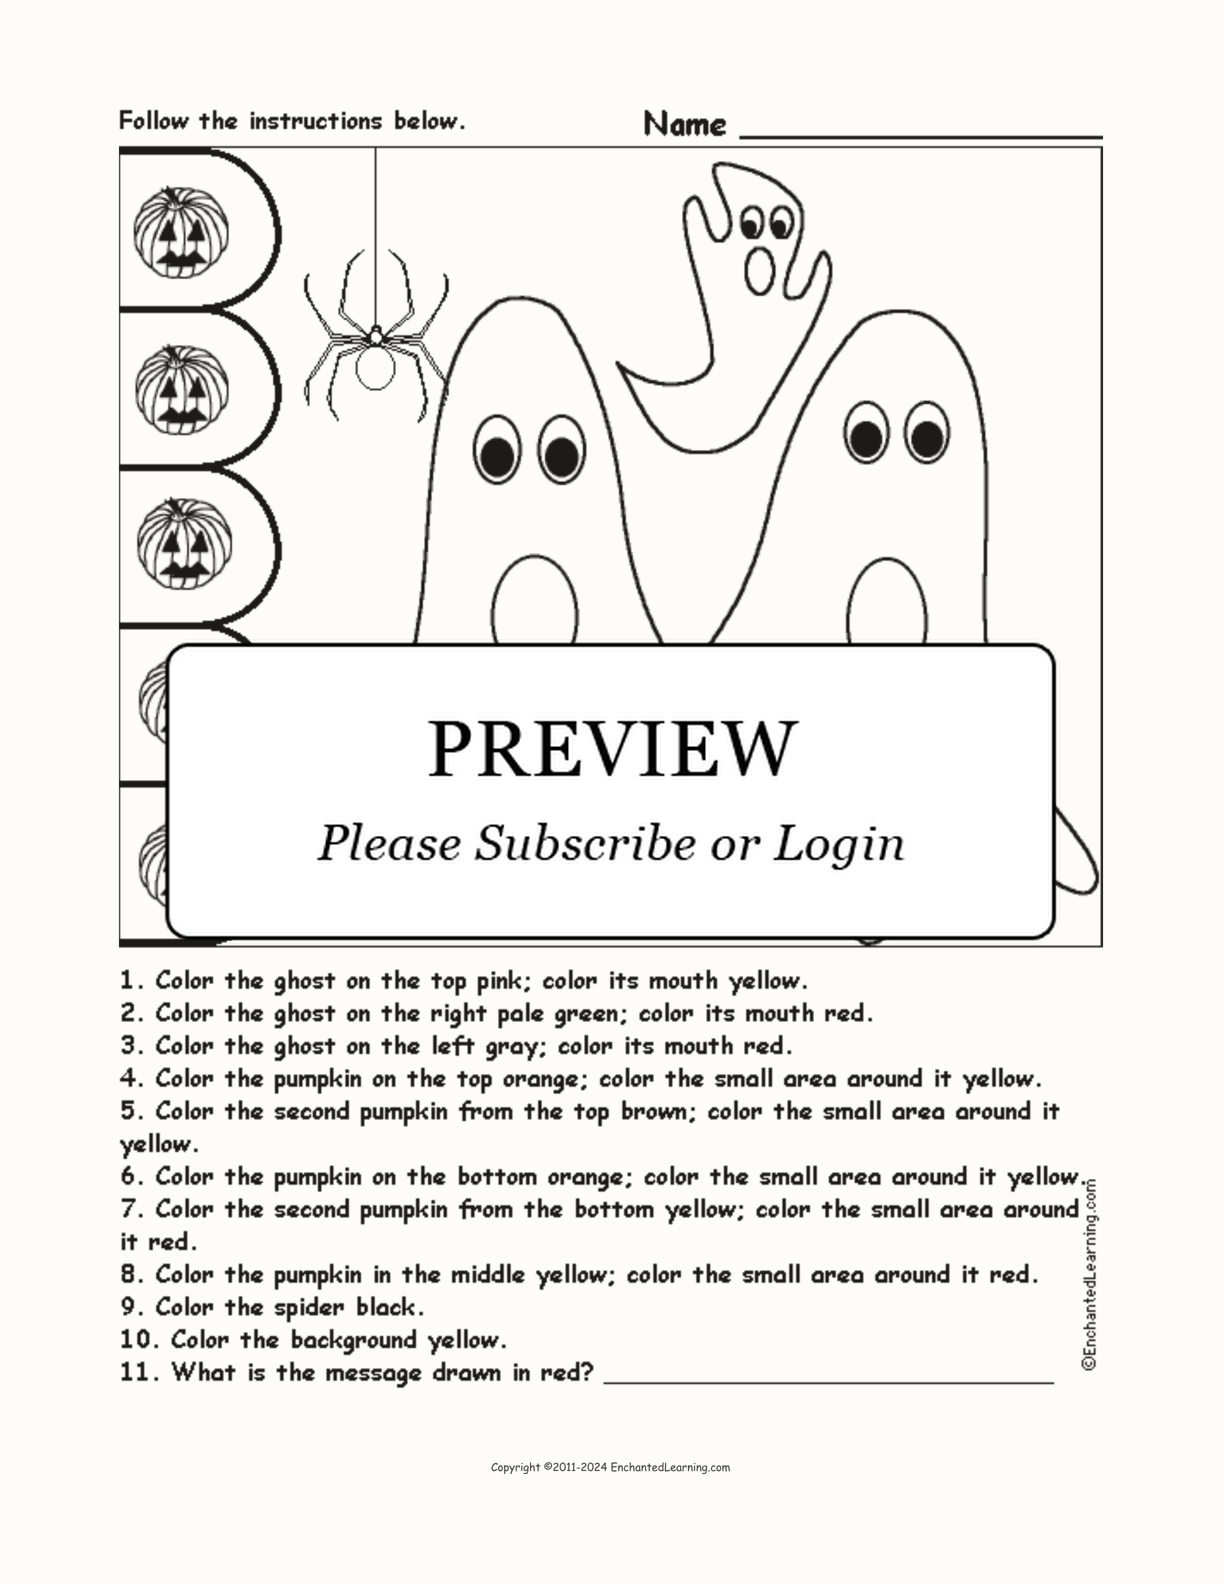 Ghastly Ghosts: Follow the Instructions interactive worksheet page 1